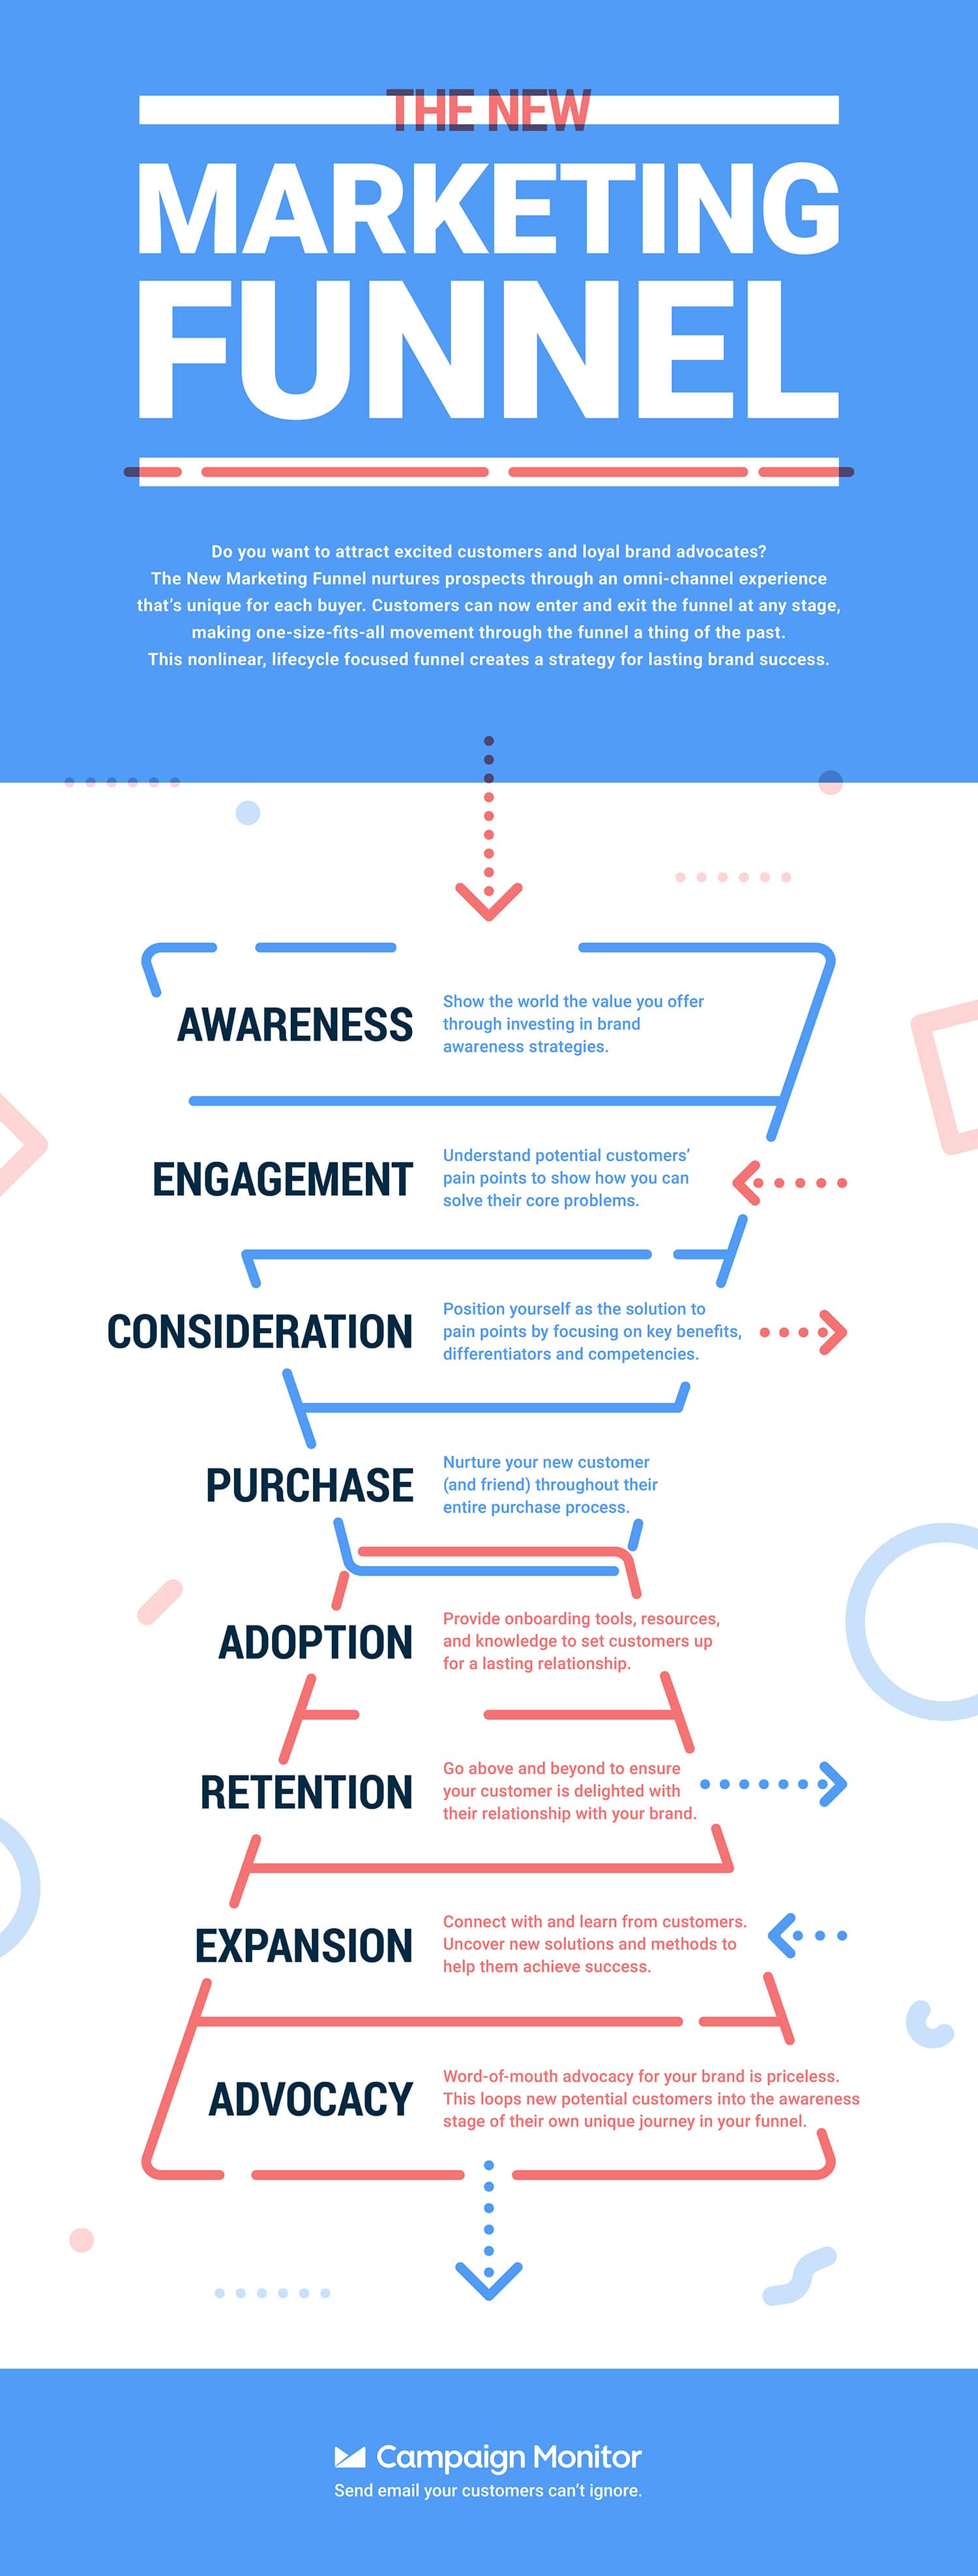 Here are the stages of the new marketing funnel, one that’s based on the average lifecycle of customers today.